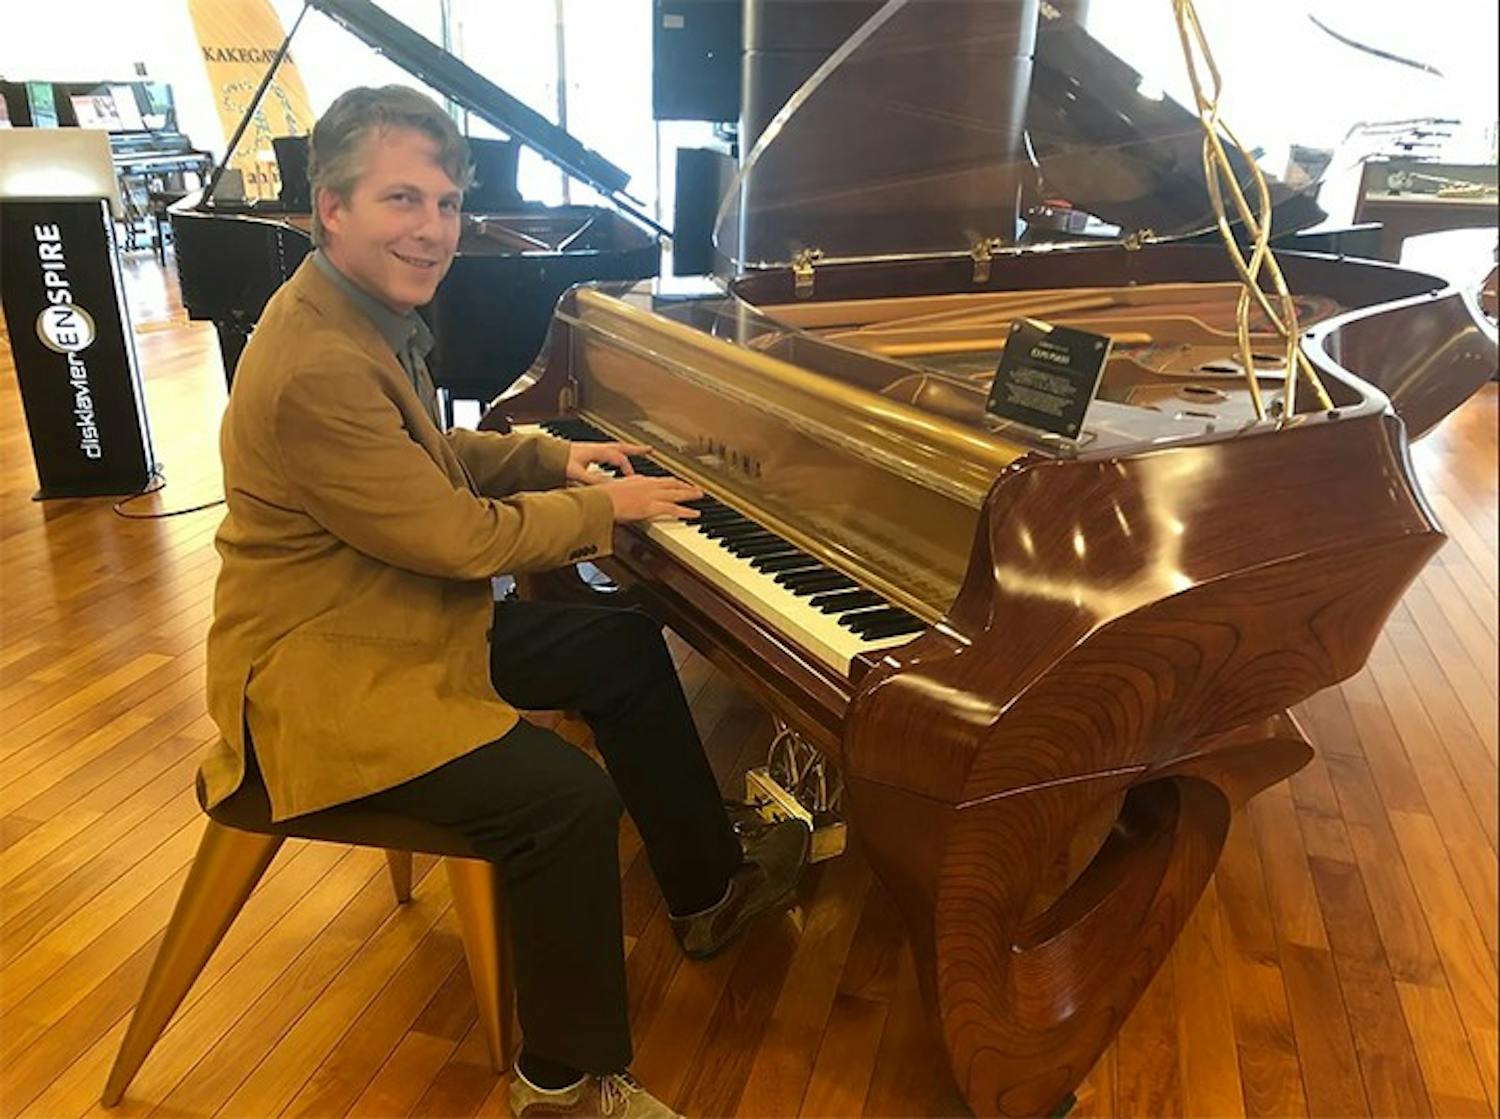 Music entrepreneurship professor David Cutler, whose book "The Savvy Musician" focuses on how to turn a musical education into a successful career, poses with a piano.